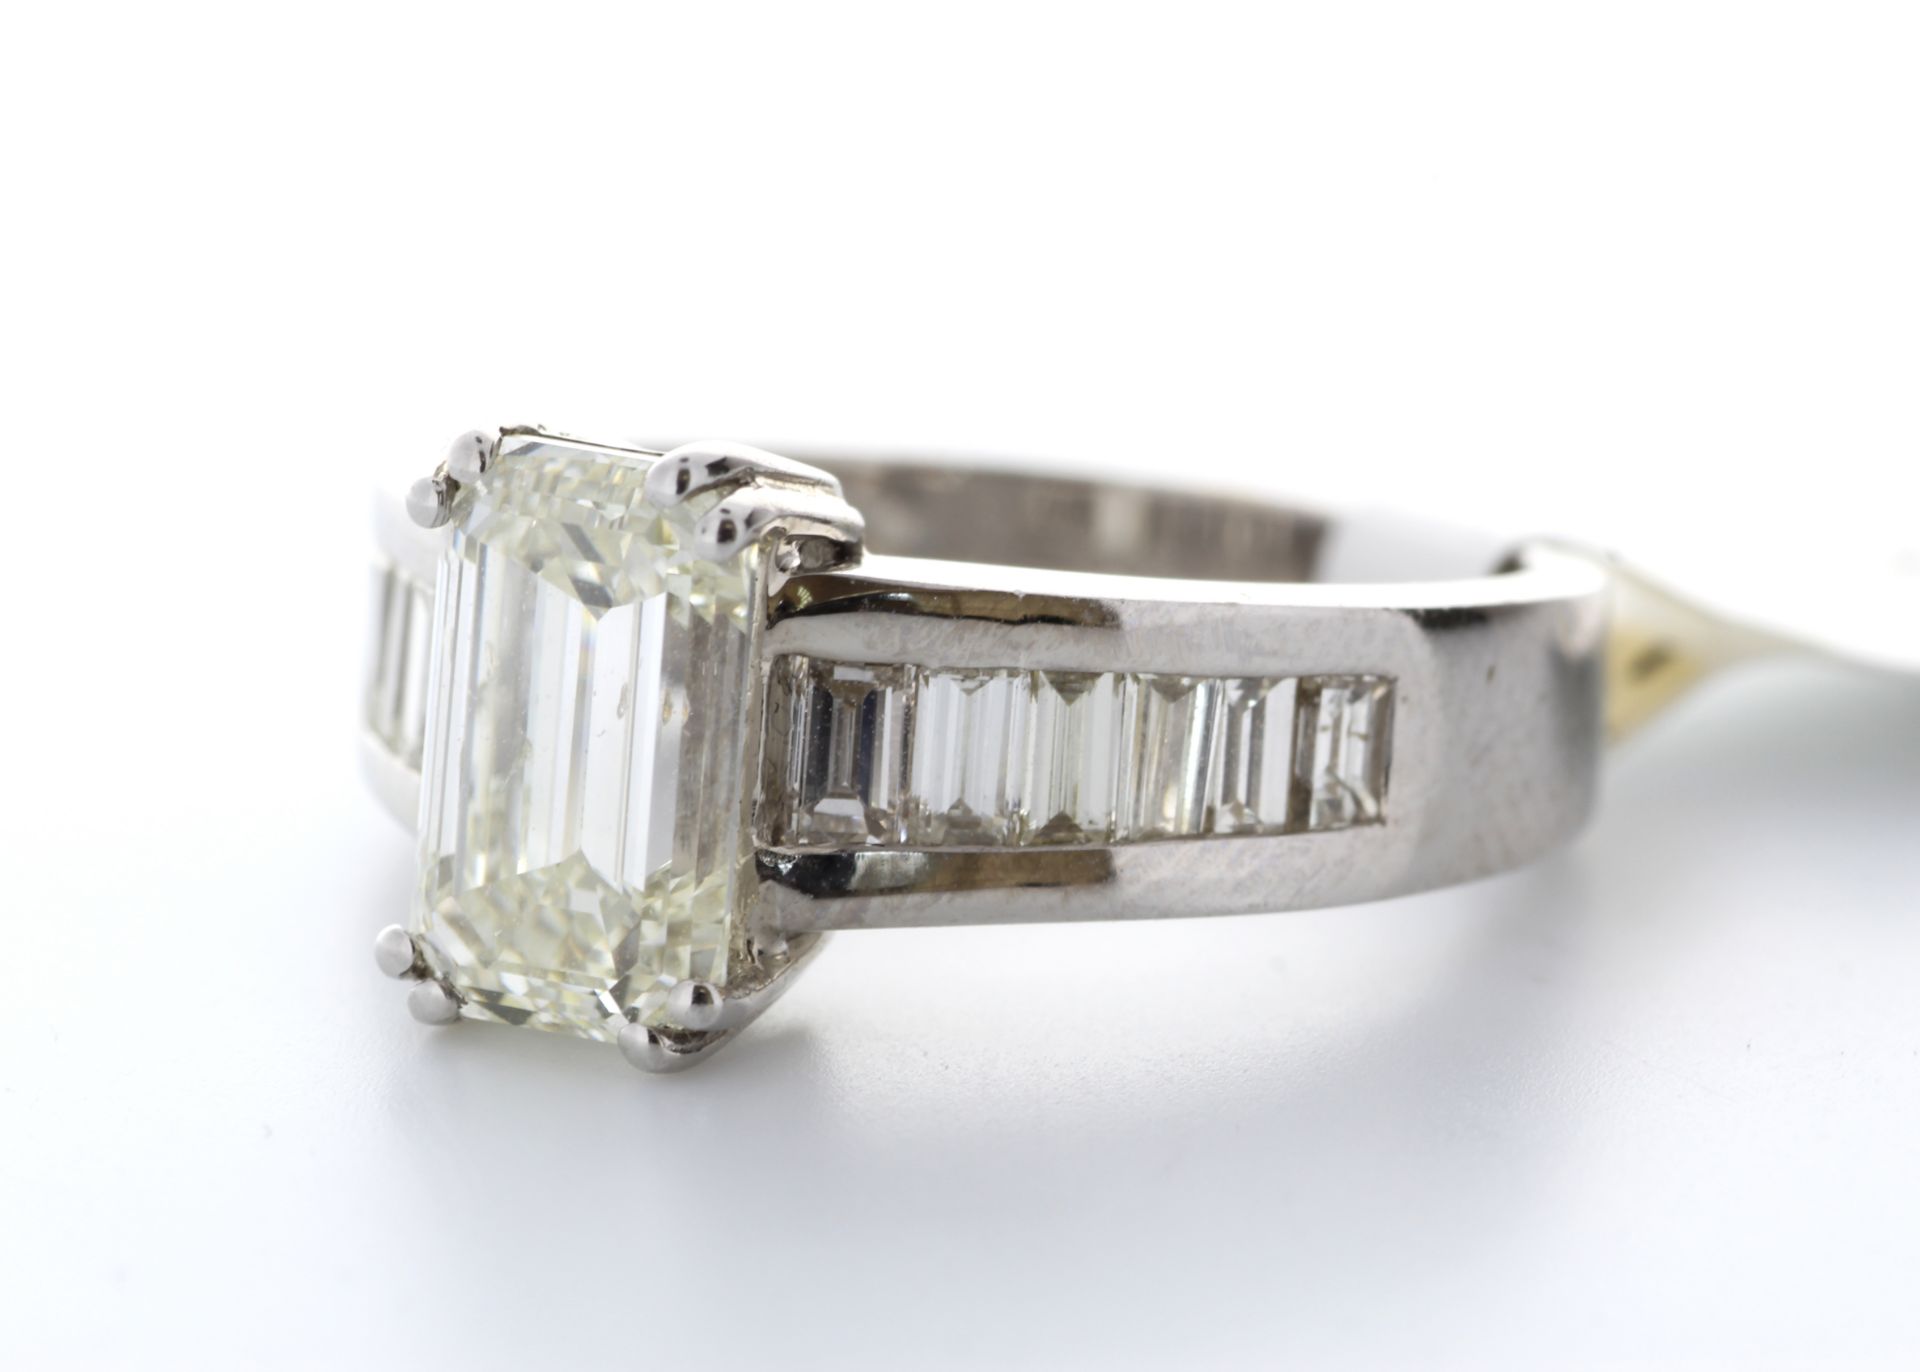 18ct White Gold Single Stone Claw Set Emerald Cut With Stone Set Shoulders Diamond Ring (2.05) 2.90 - Image 2 of 3